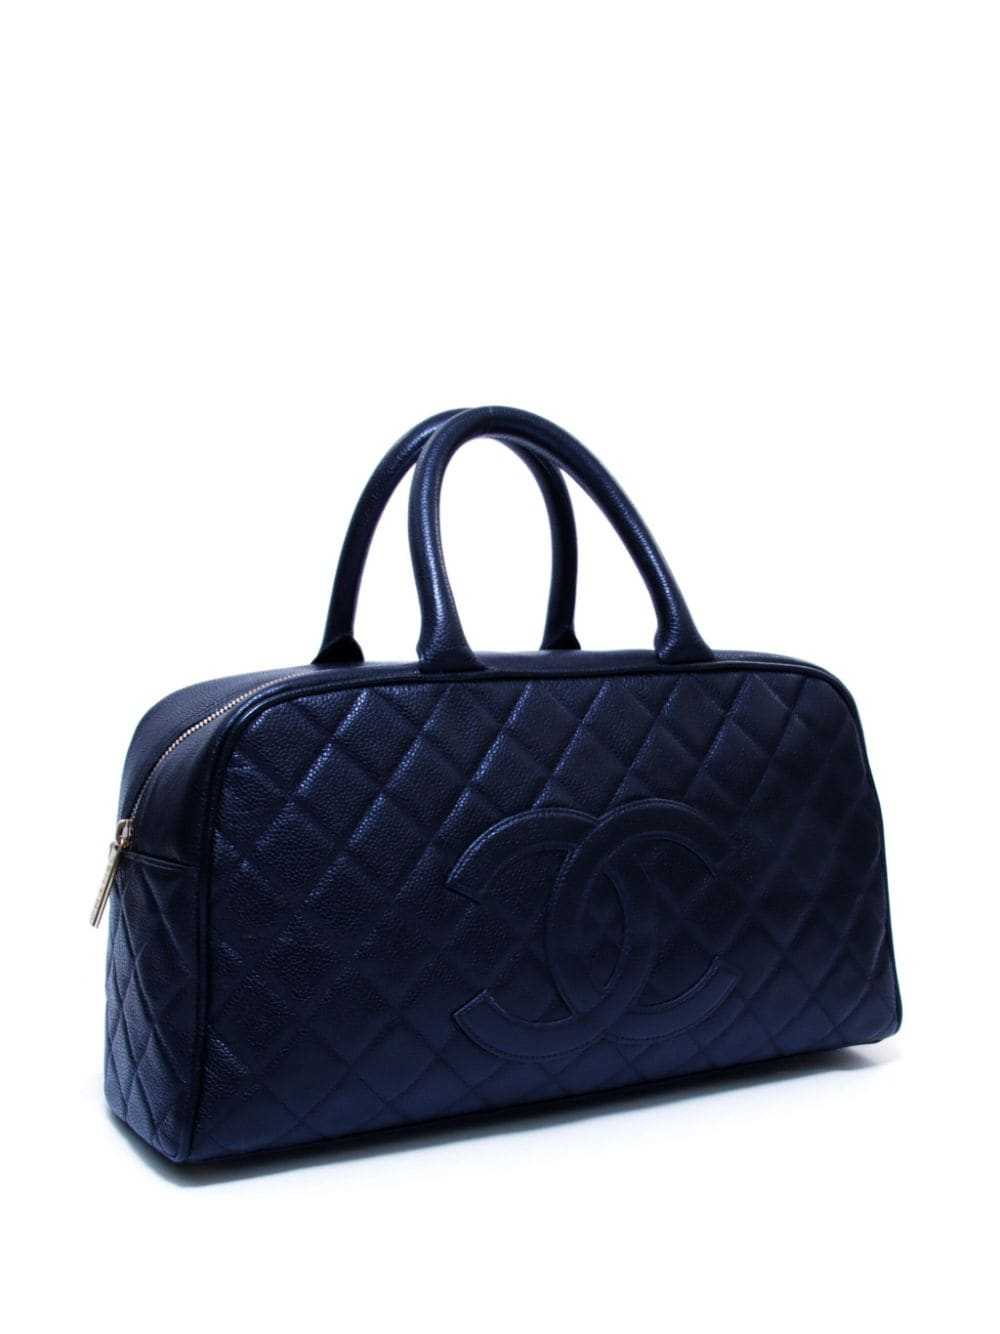 CHANEL Pre-Owned 2003-2004 diamond-quilted handba… - image 3